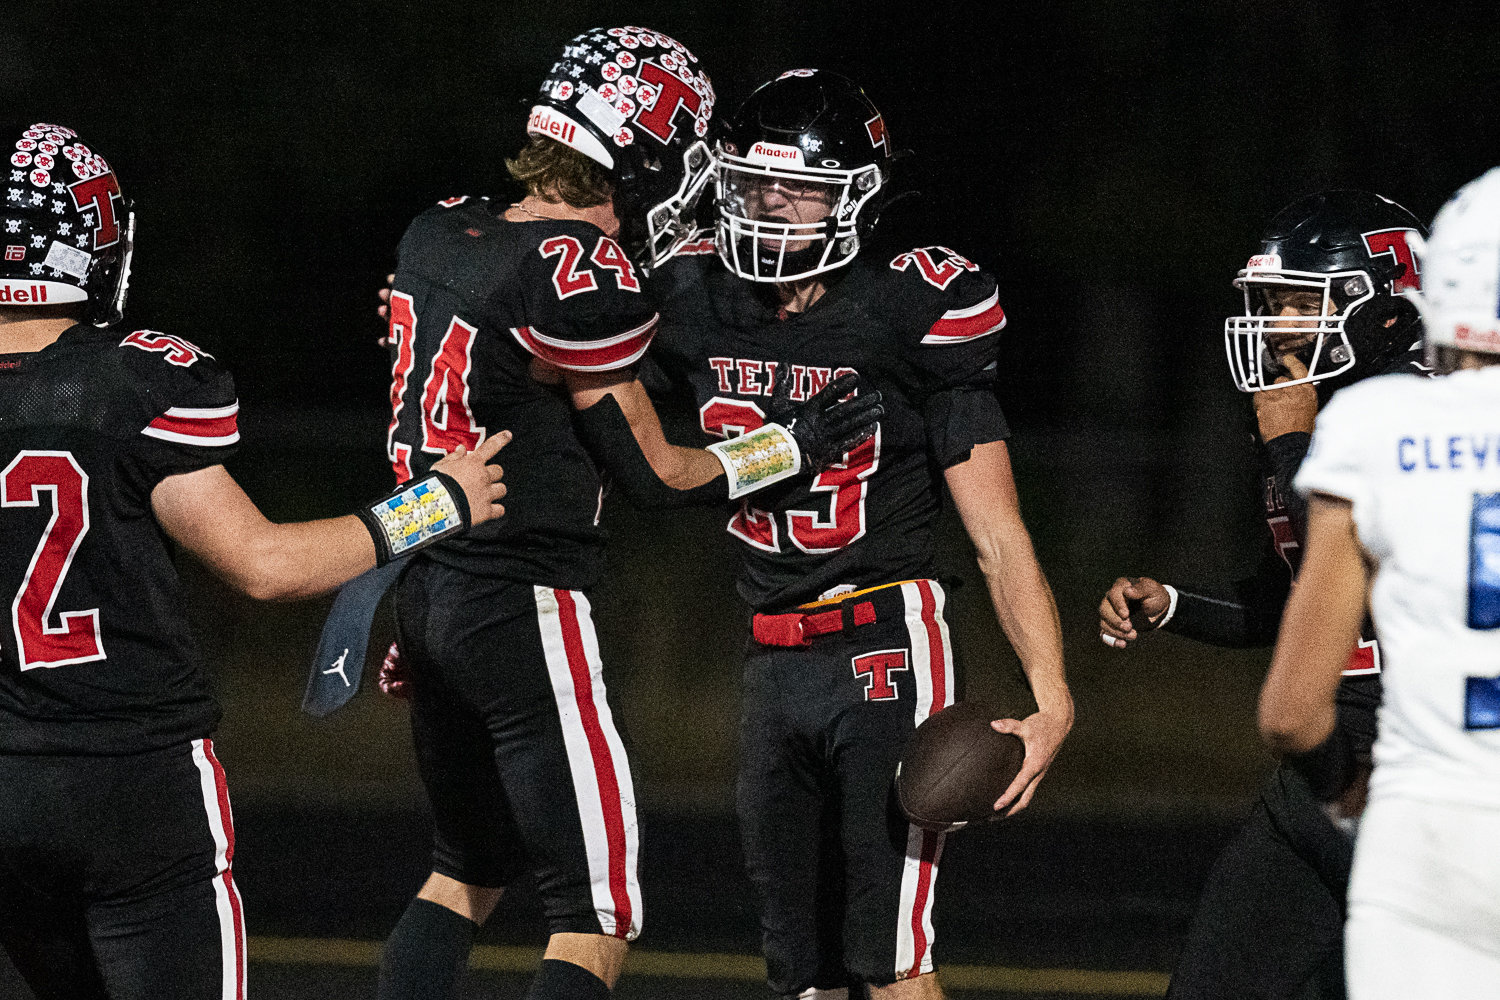 Tenino tailback Dylan Spicer celebrates a touchdown against Eatonville Sept. 30 on the Black Top.